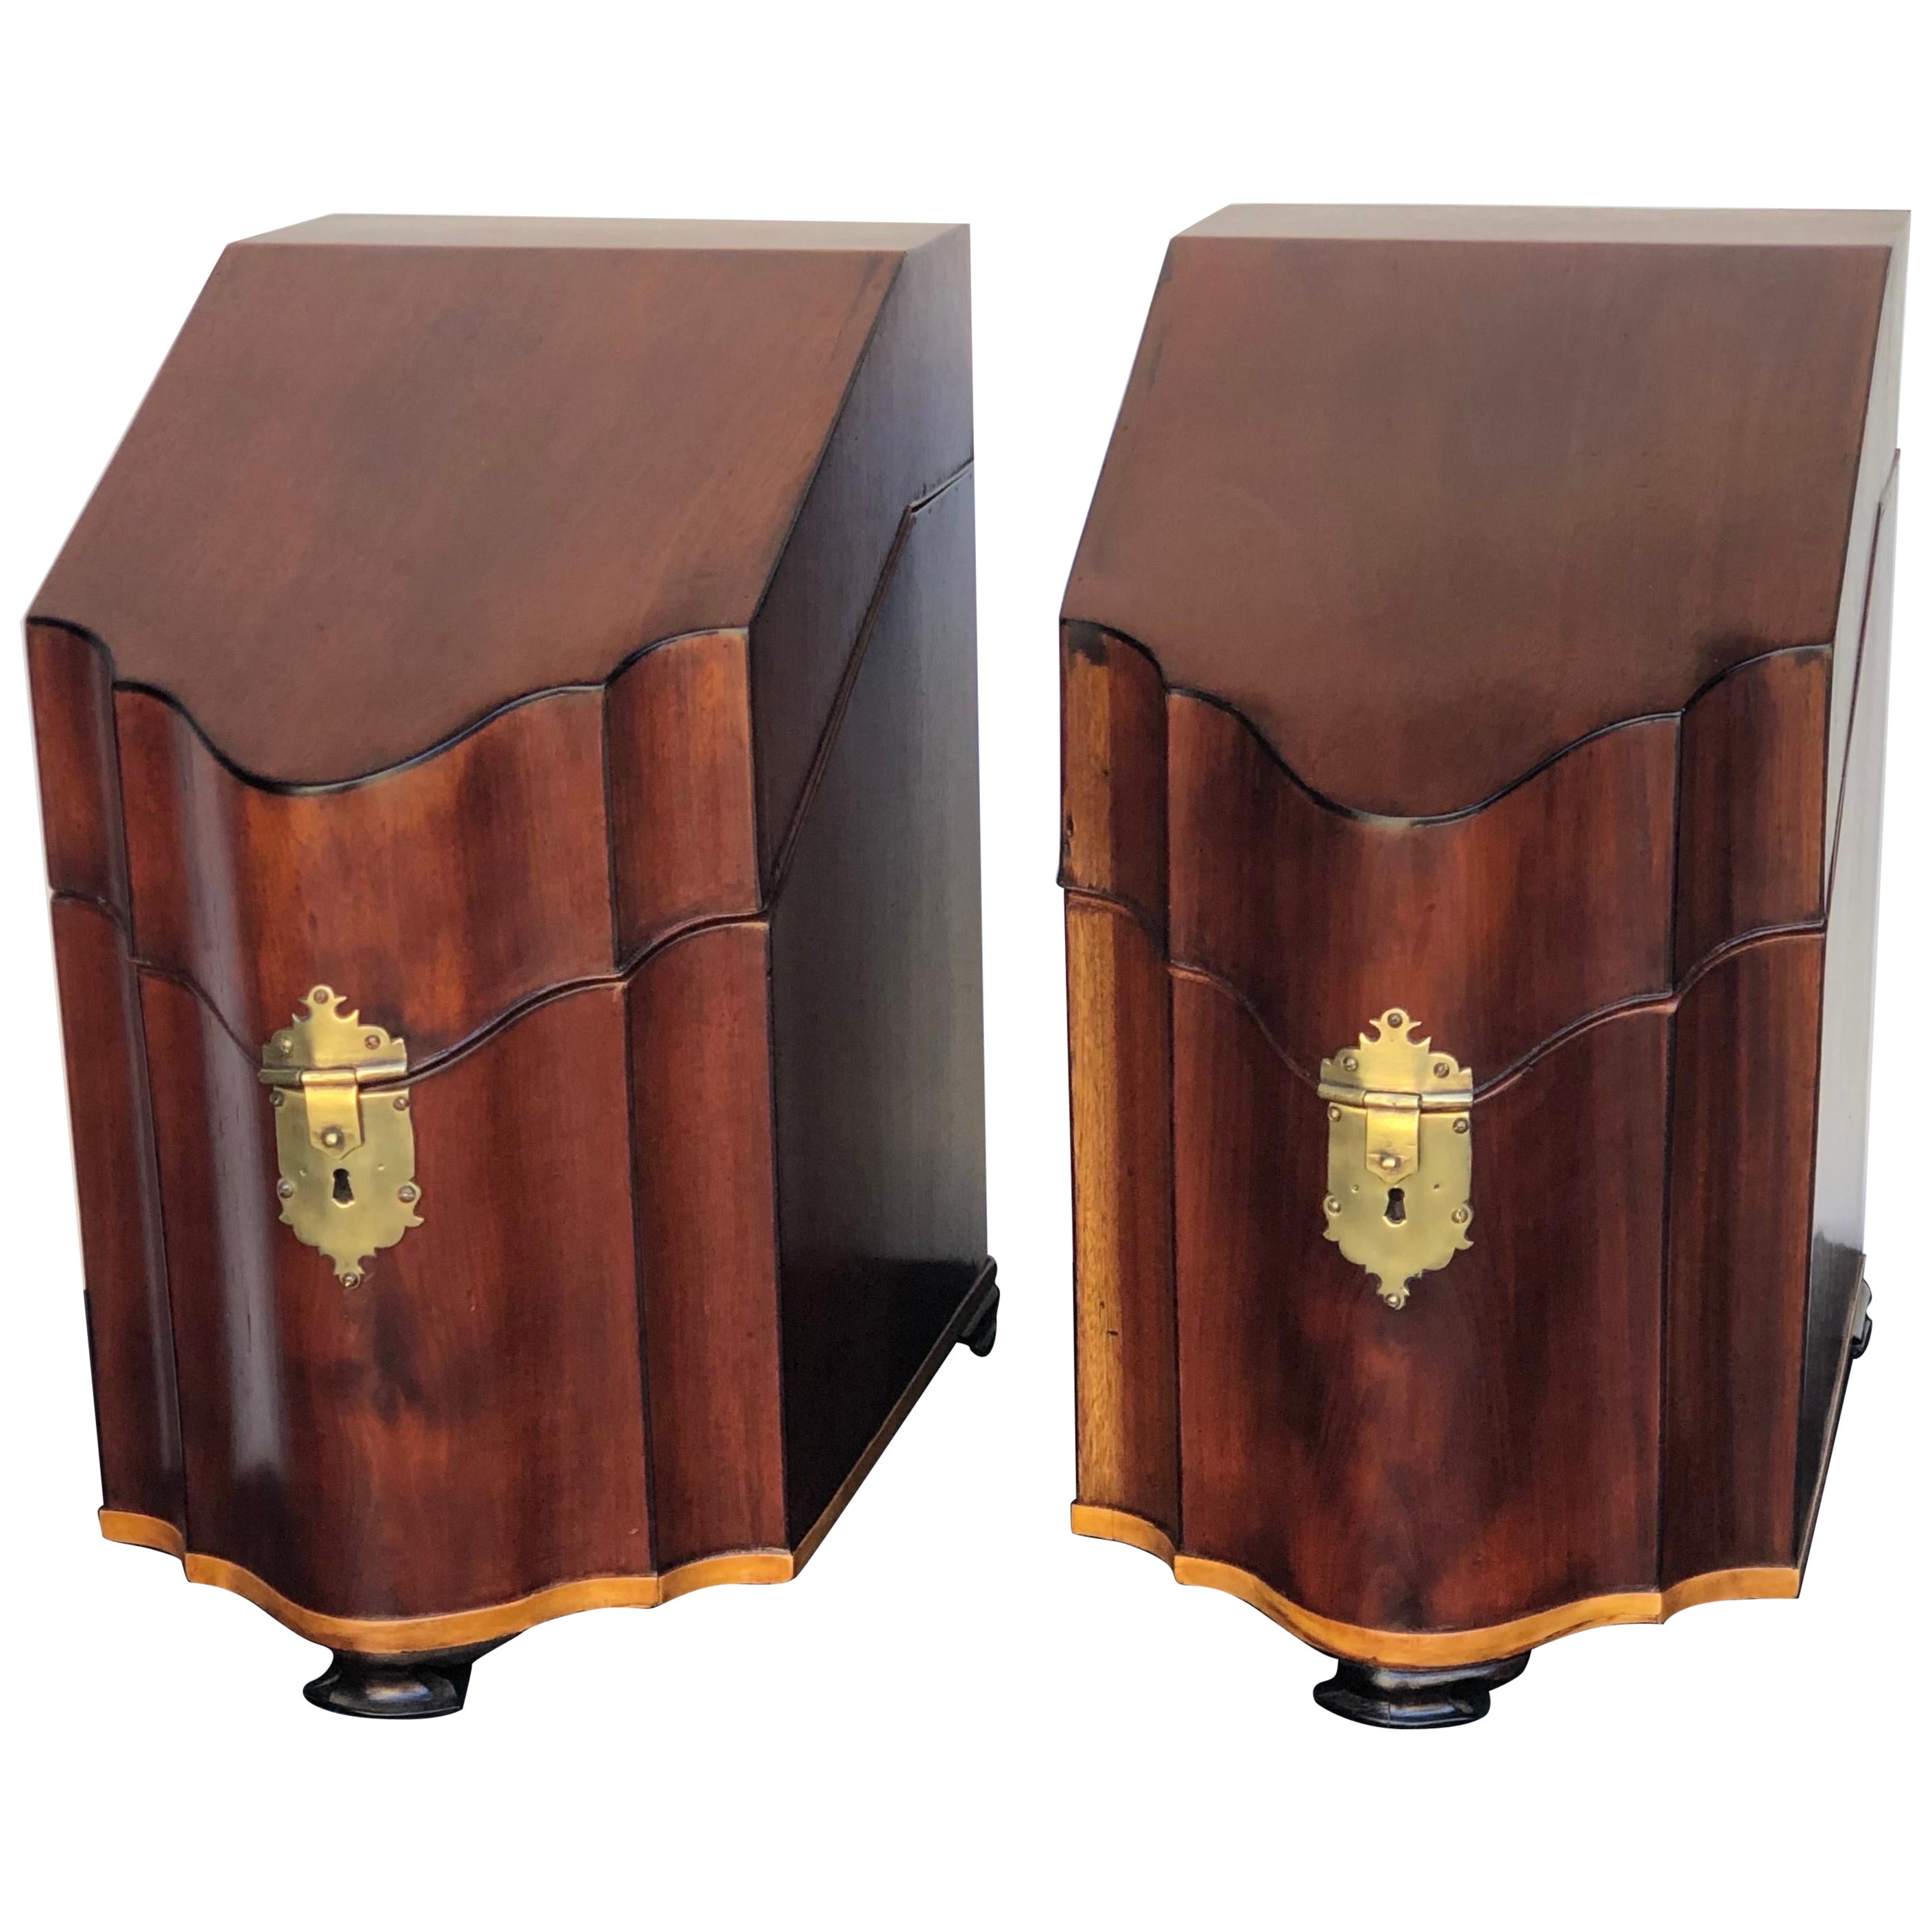 Pair English Mahogany Serpentine Inlaid Cutlery Boxes on Bracket Feet 18th C For Sale